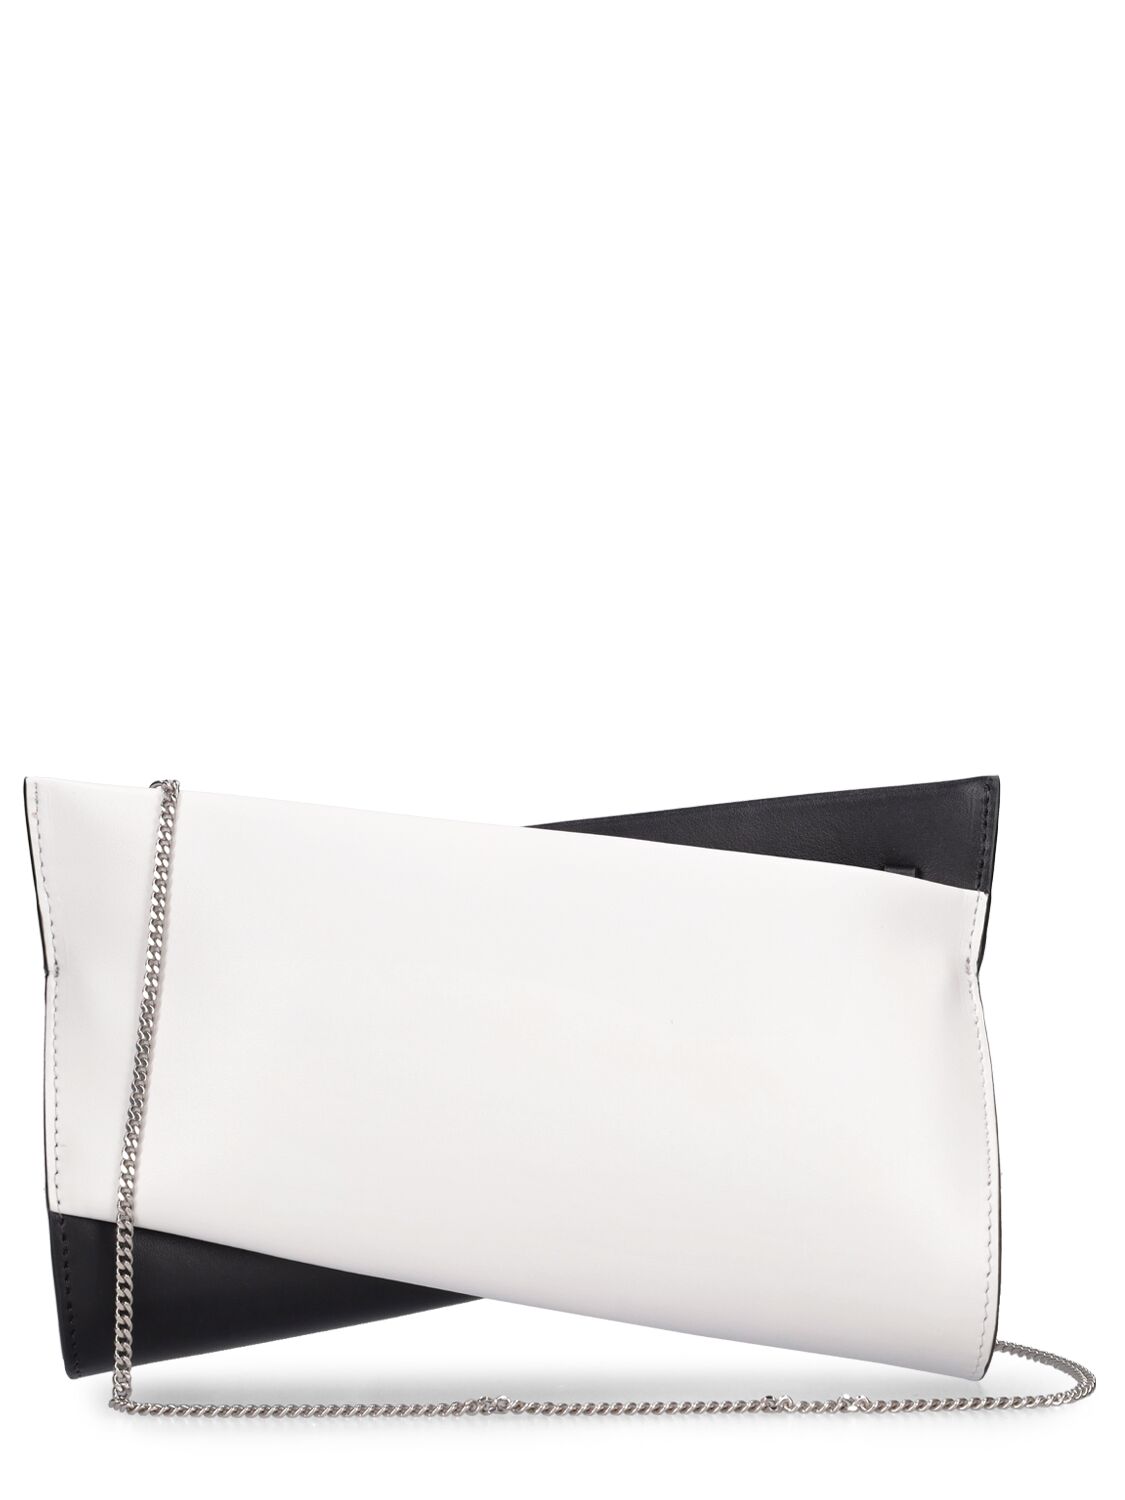 Shop Christian Louboutin Small Loubitwist Leather Bag In Black,white